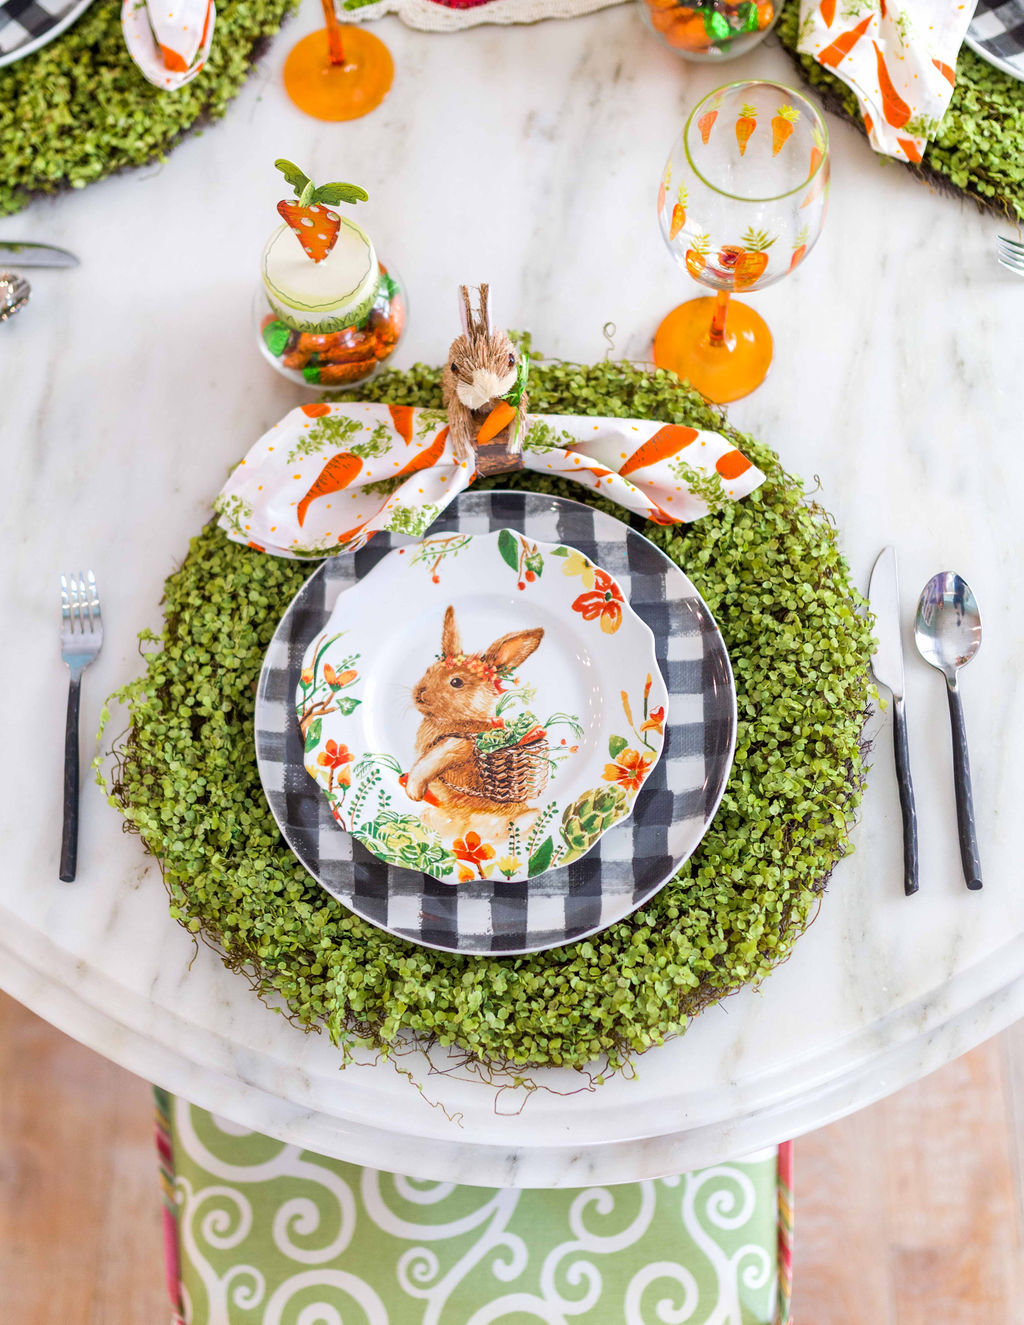 Turtle Creek Lane home decor blogger shows off her Easter 2019 tablescapes